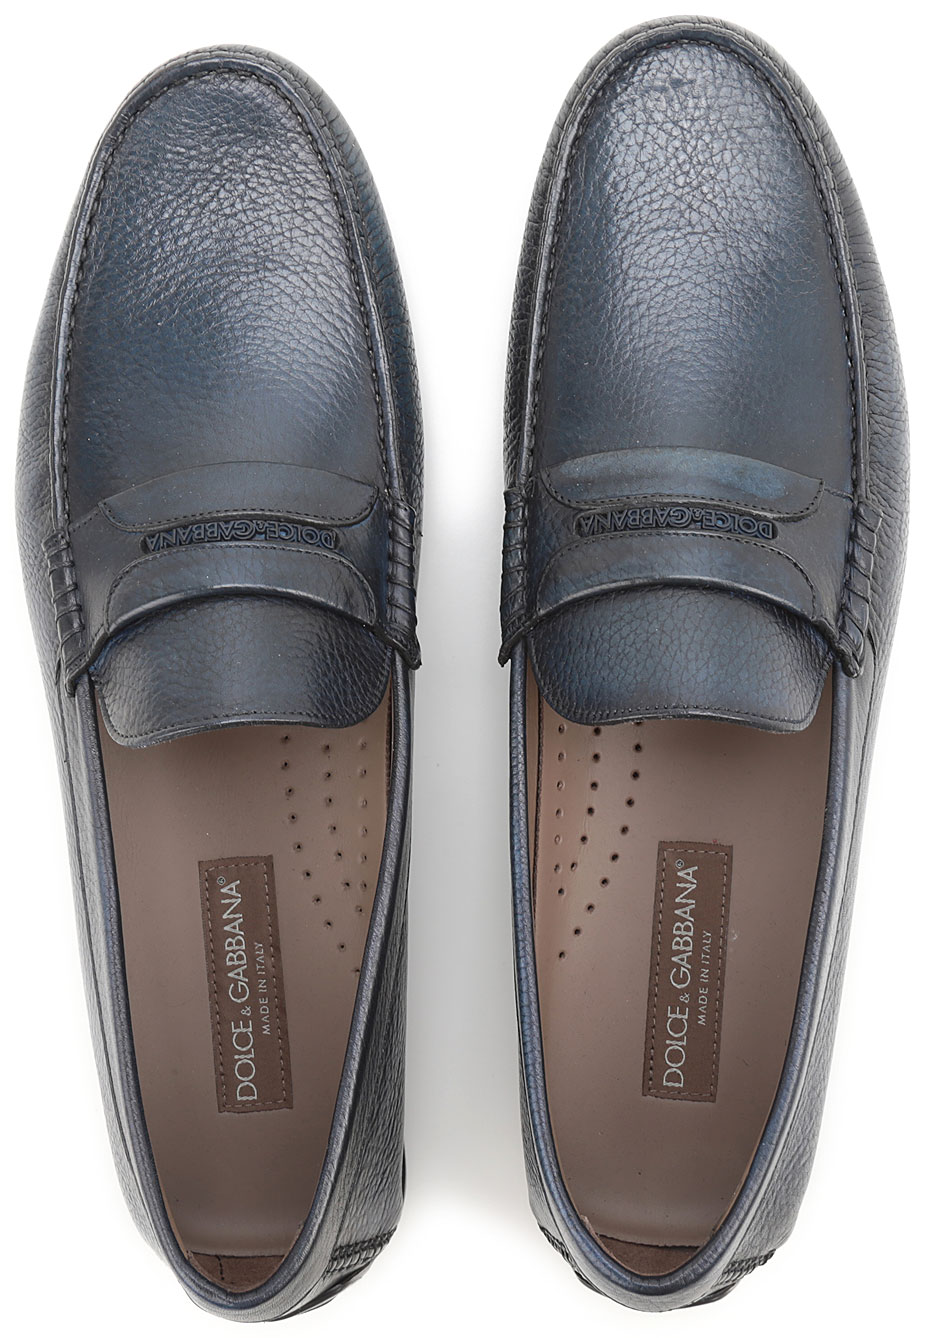 Mens Shoes Dolce & Gabbana, Style code: a30016-a1692-80650